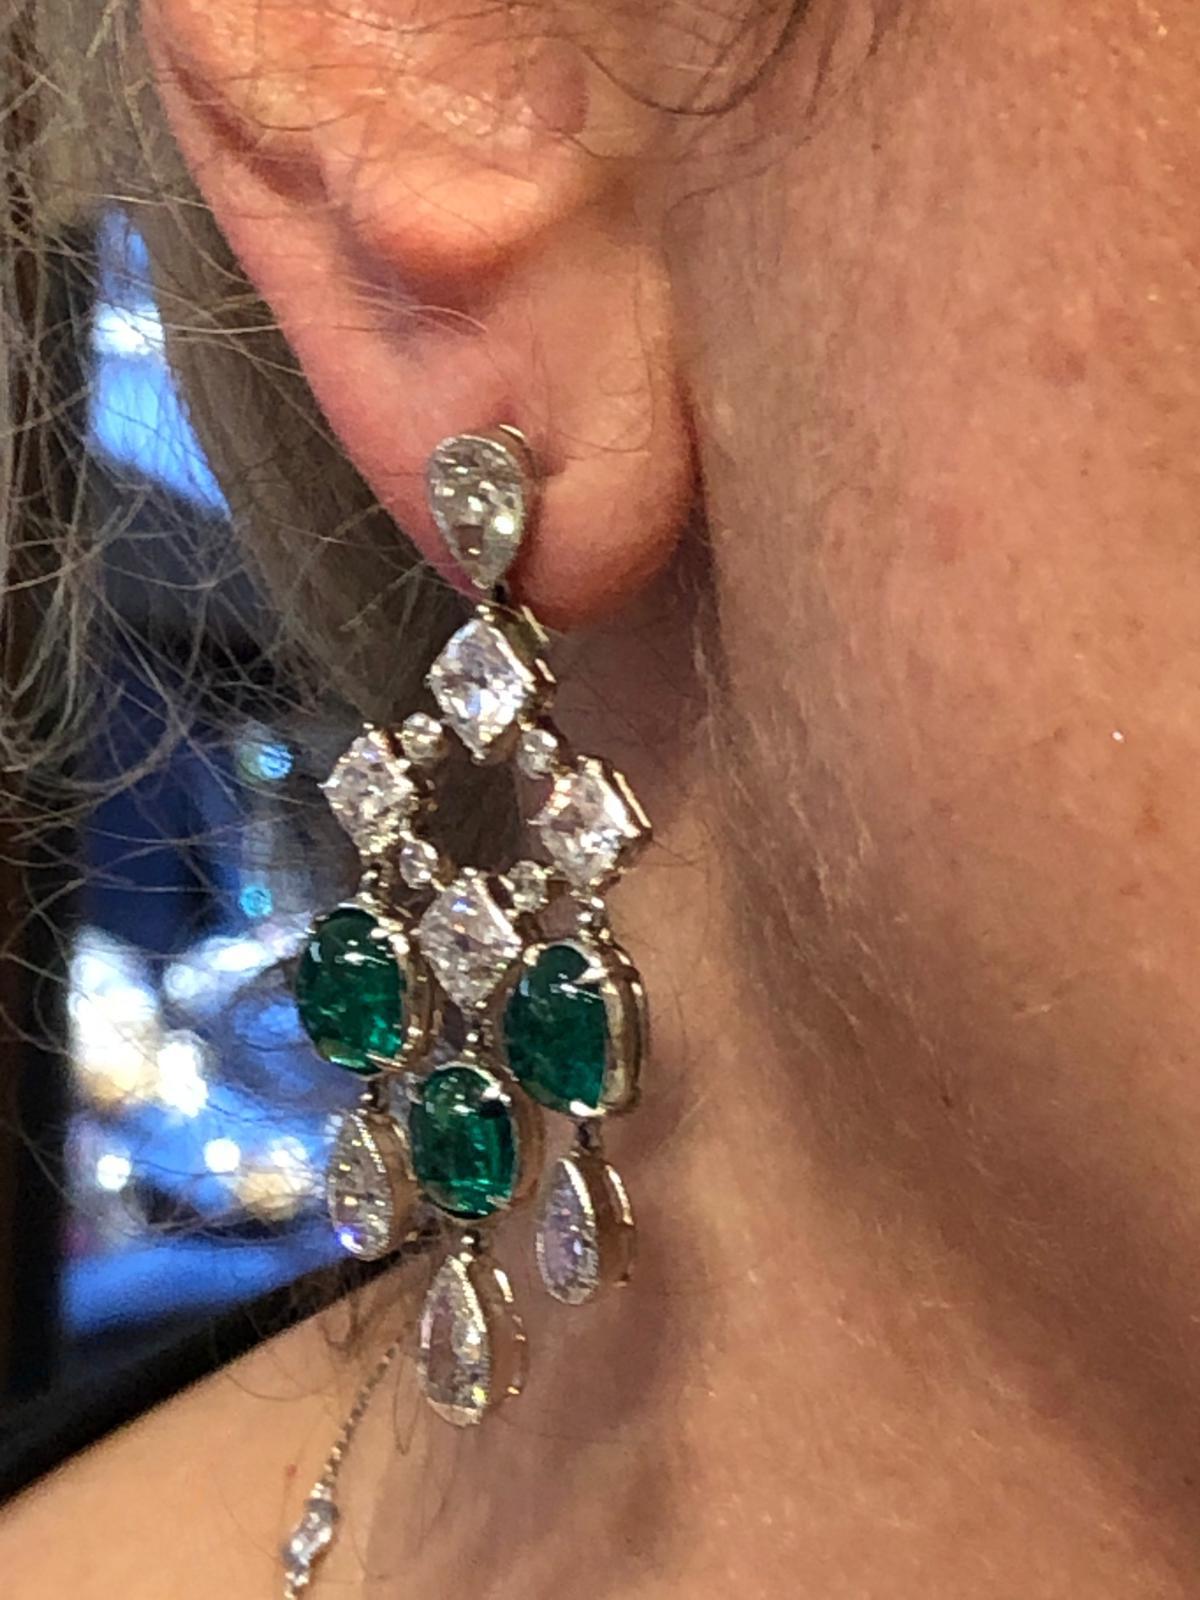 Platinum Diamond, Colombian Emerald Earrings.
A pair of platinum earrings, set with diamonds and six Colombian emeralds.
Measures approx. 2″ in length by 0.87″ in width; gross weight approx. 18.6 grams
Colombian Emerald weights: 2.14 ,  2.07, 2.05,